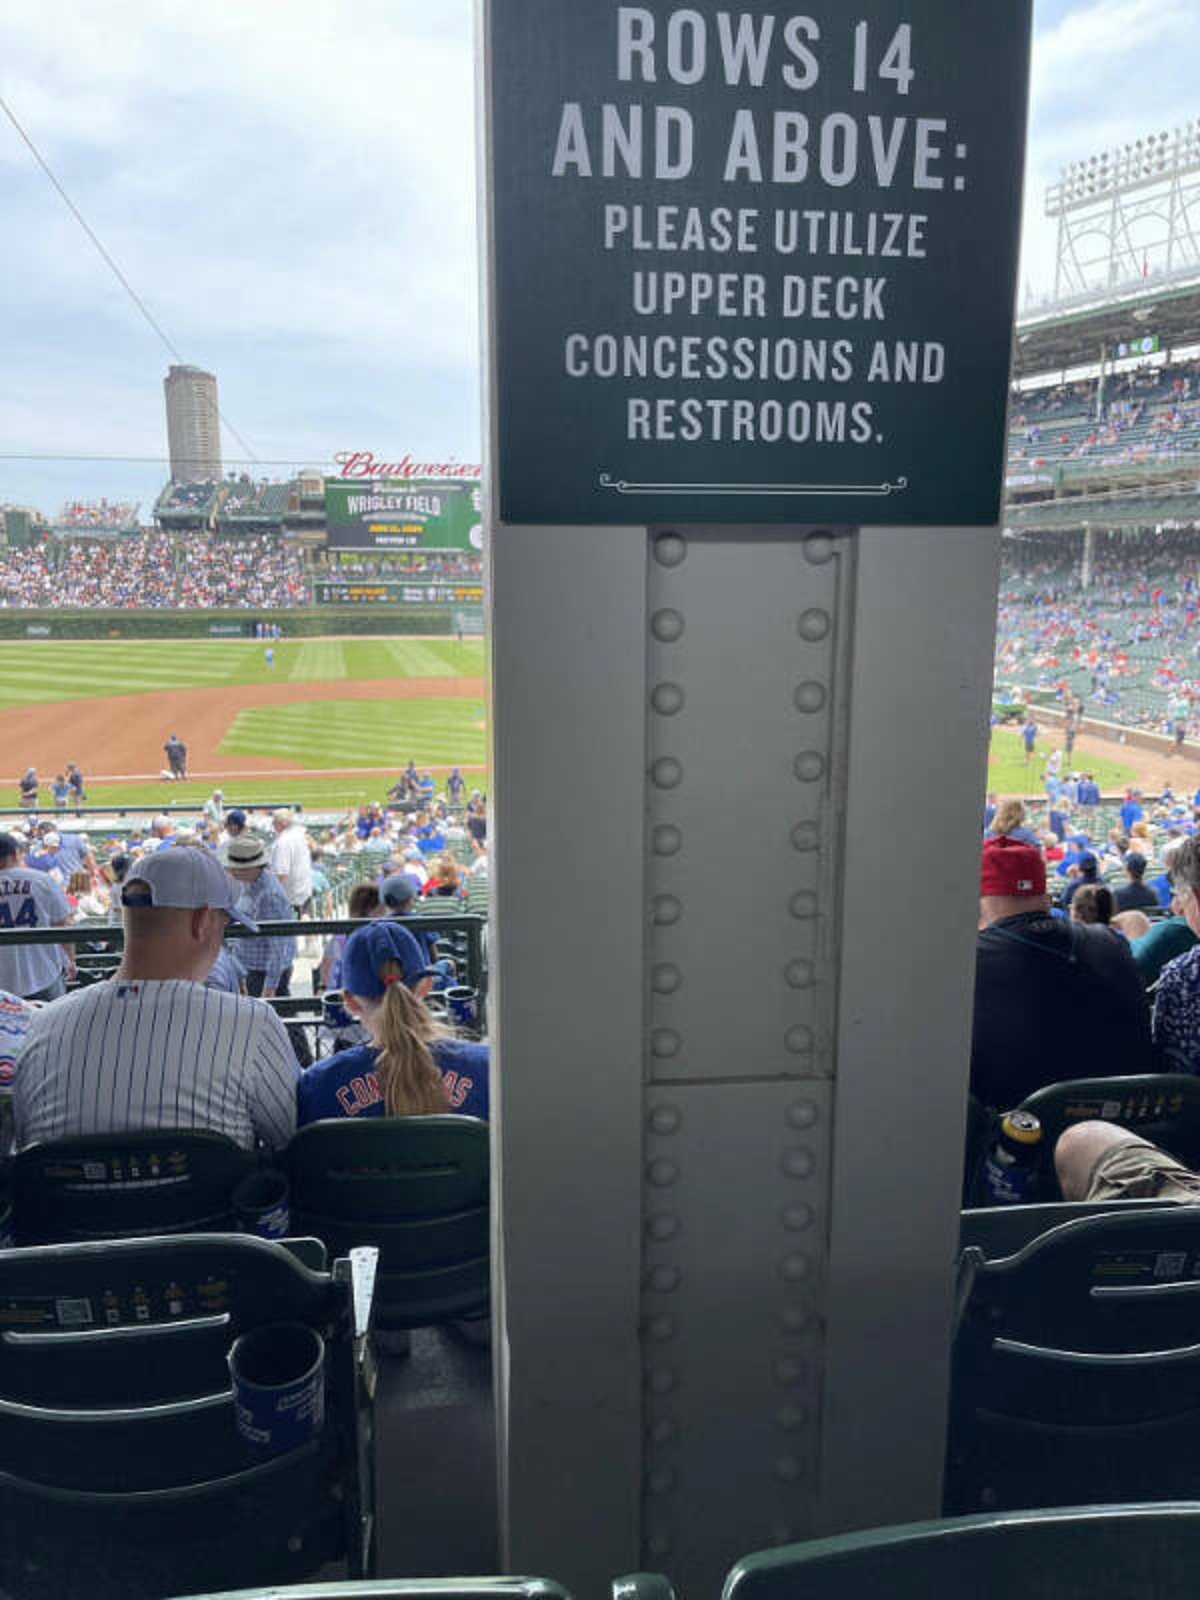 “$350 for unobstructed view of cubs game at Wrigley for Father’s Day with my kid. FU StubHub!”